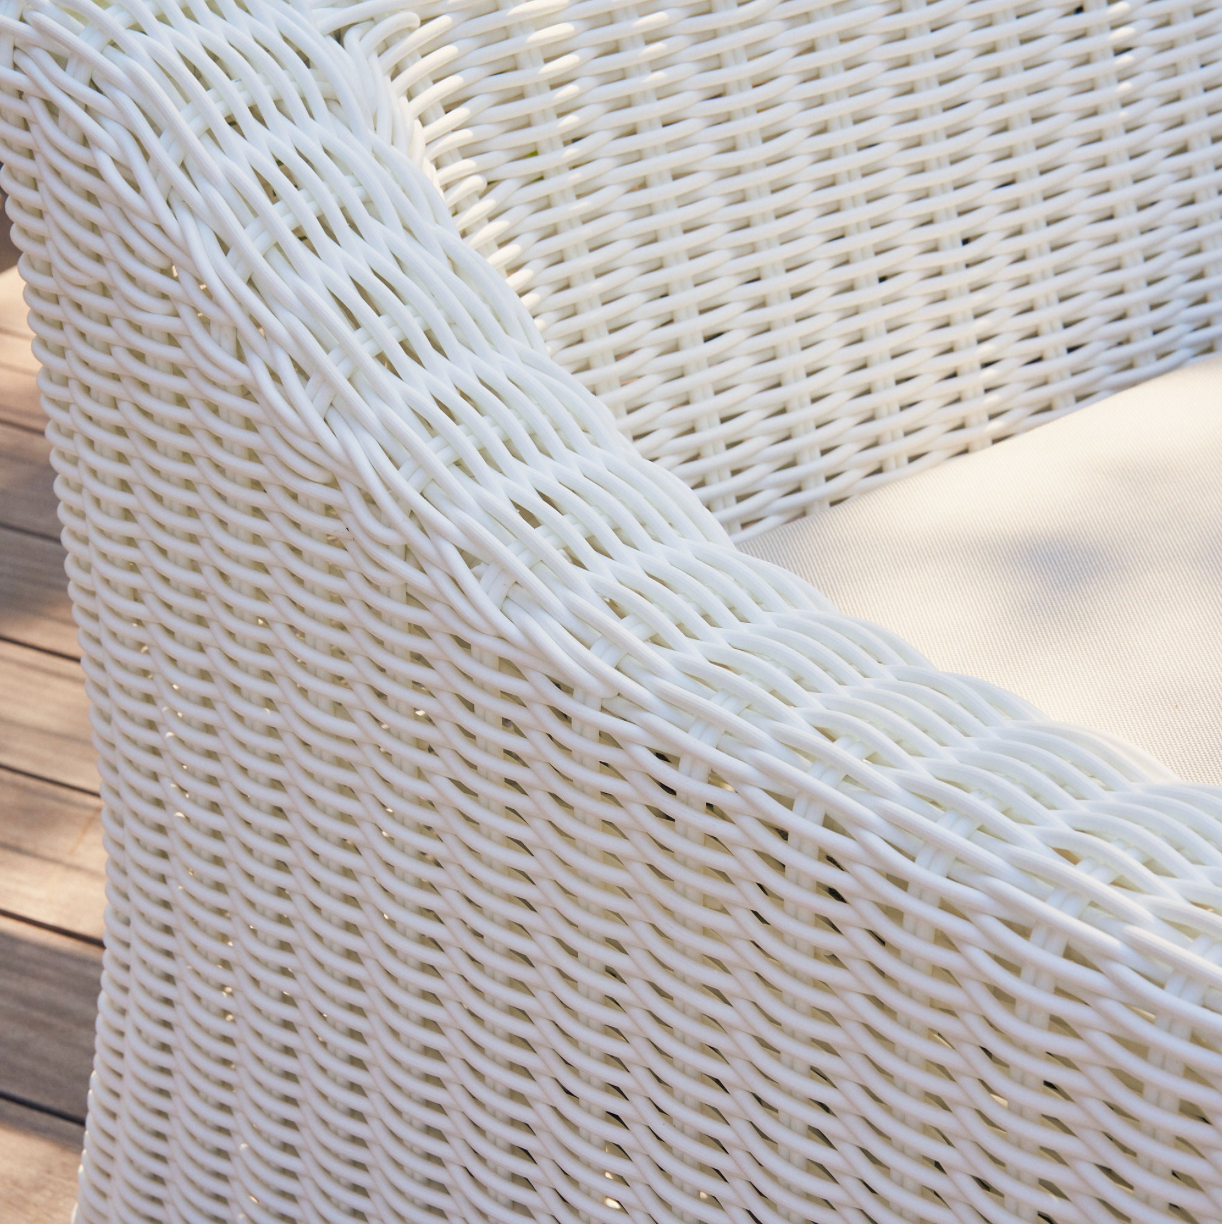 Highest Quality Outdoor Wicker Seating